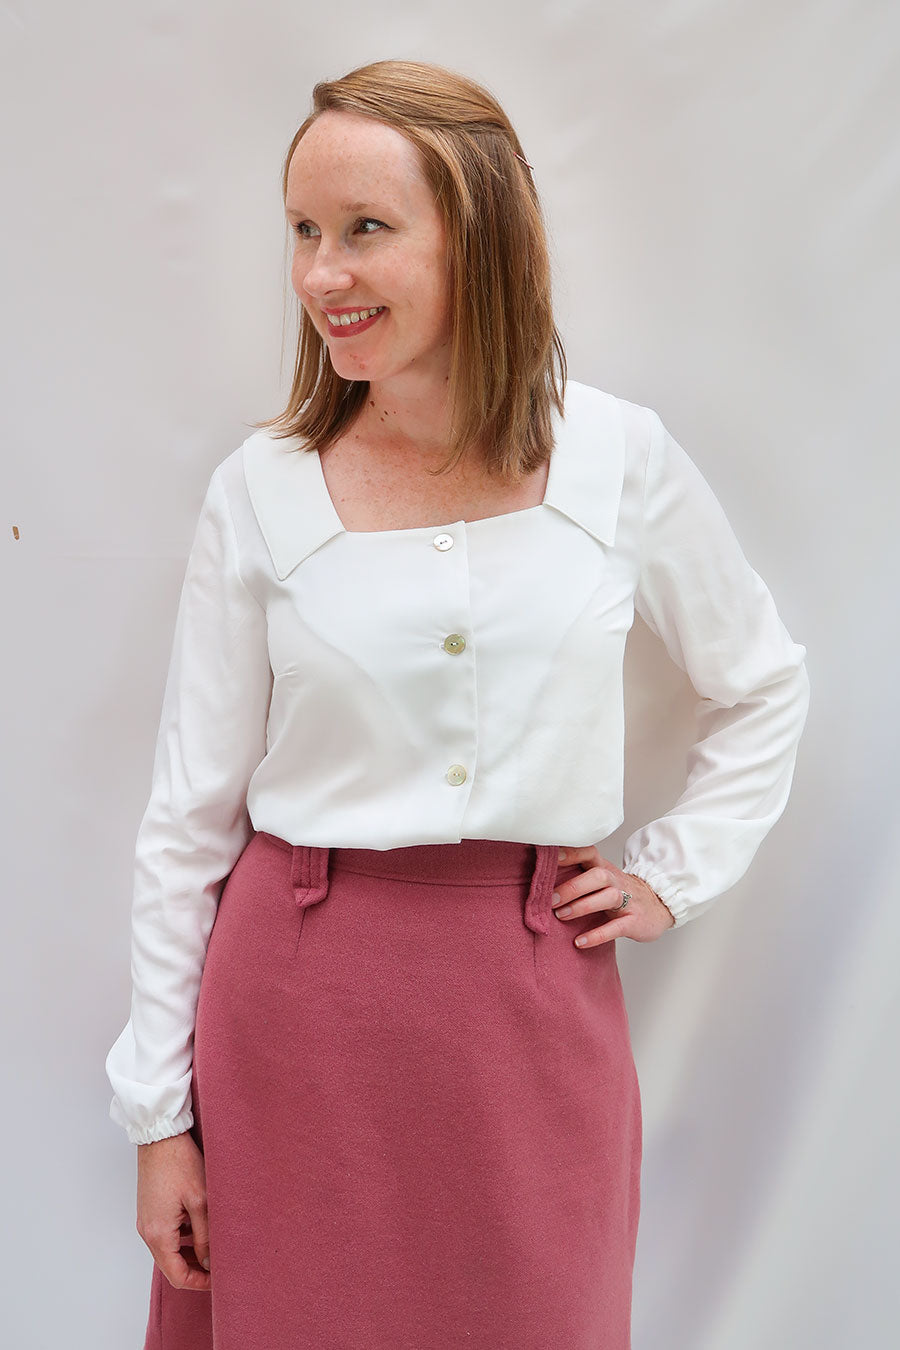 Woman wearing the Aisling Blouse sewing pattern from Jennifer Lauren Handmade on The Fold Line. A blouse pattern made in cotton lawn, voile, poplin, linen, chambray, rayon, silks and sheer fabrics, featuring a full button-down bodice, bust darts, square n